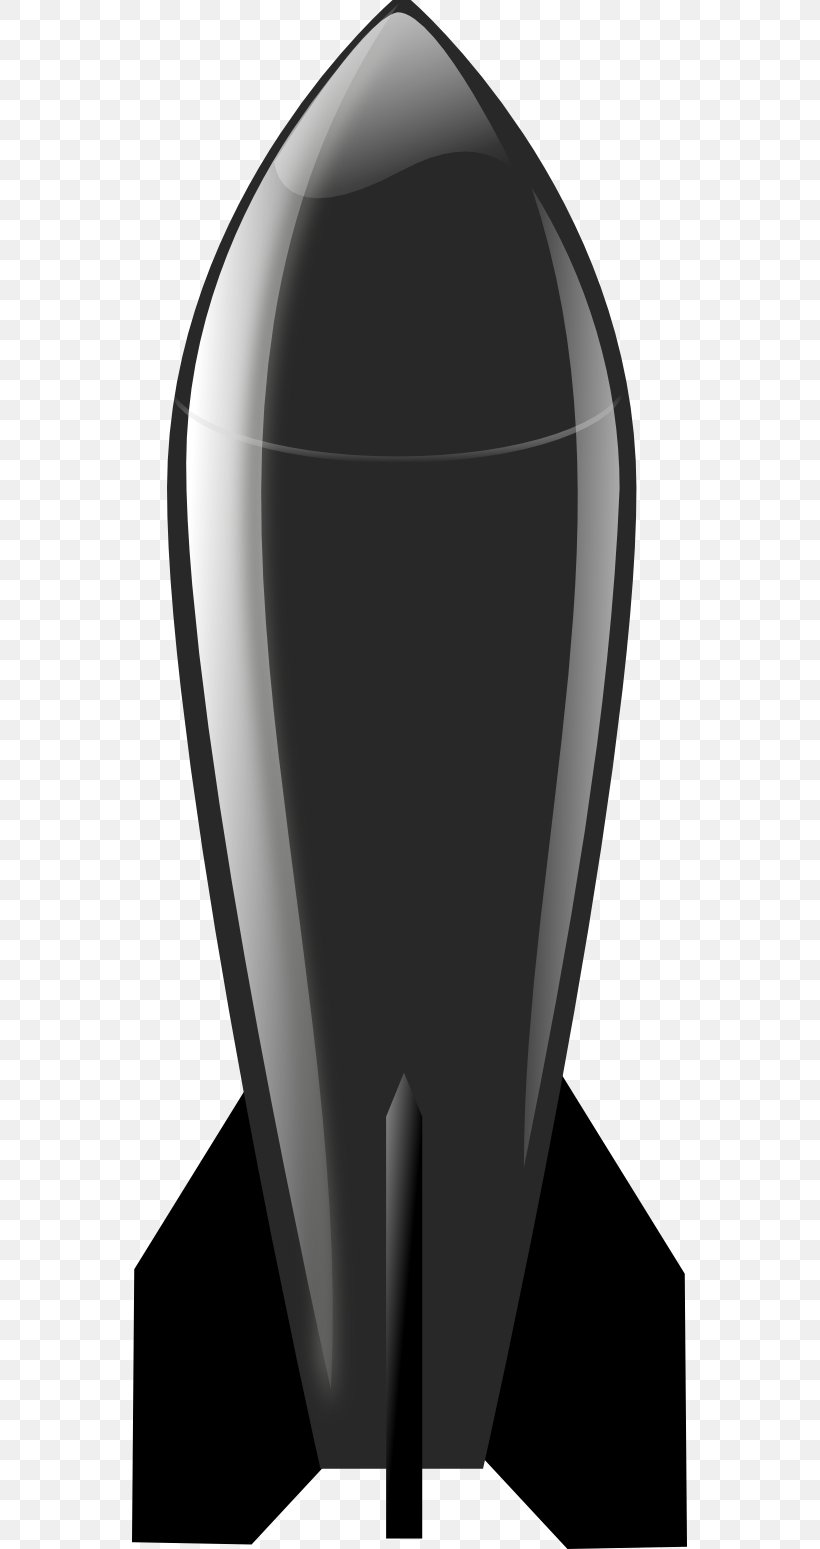 Bomb Thermonuclear Weapon Clip Art, PNG, 555x1549px, Bomb, Black, Black And White, Detonation, Explosion Download Free